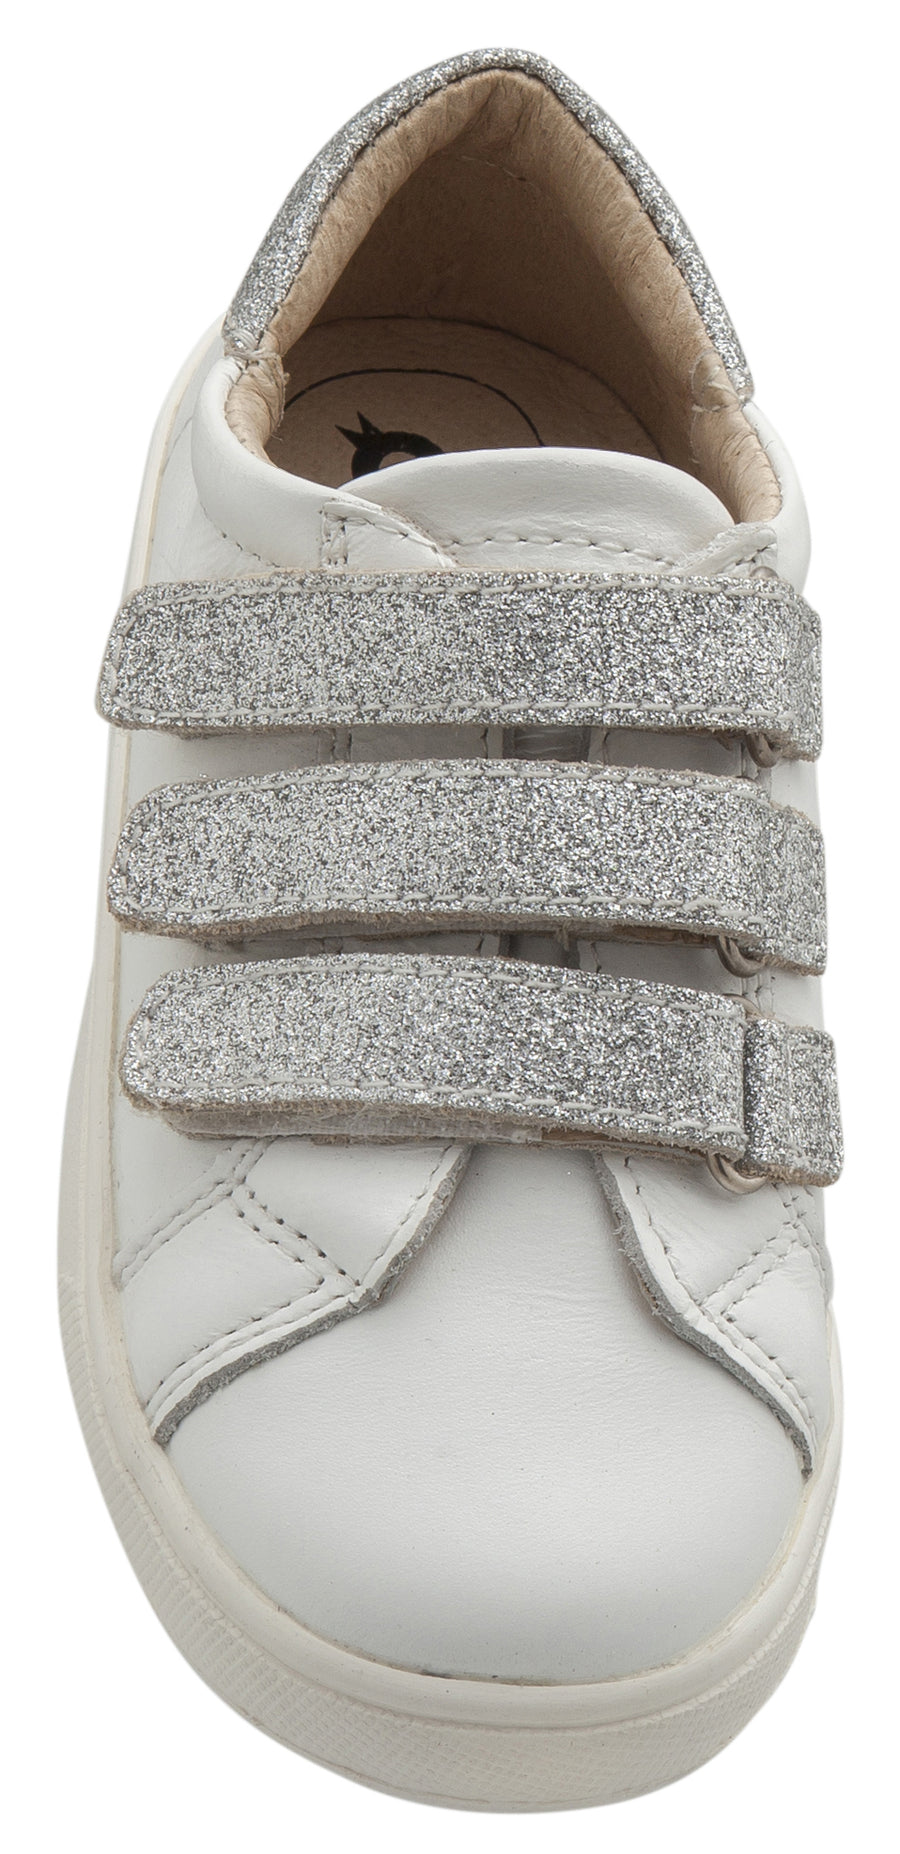 Old Soles Girl's Glam Markert Sneakers, Snow / Glam Argent